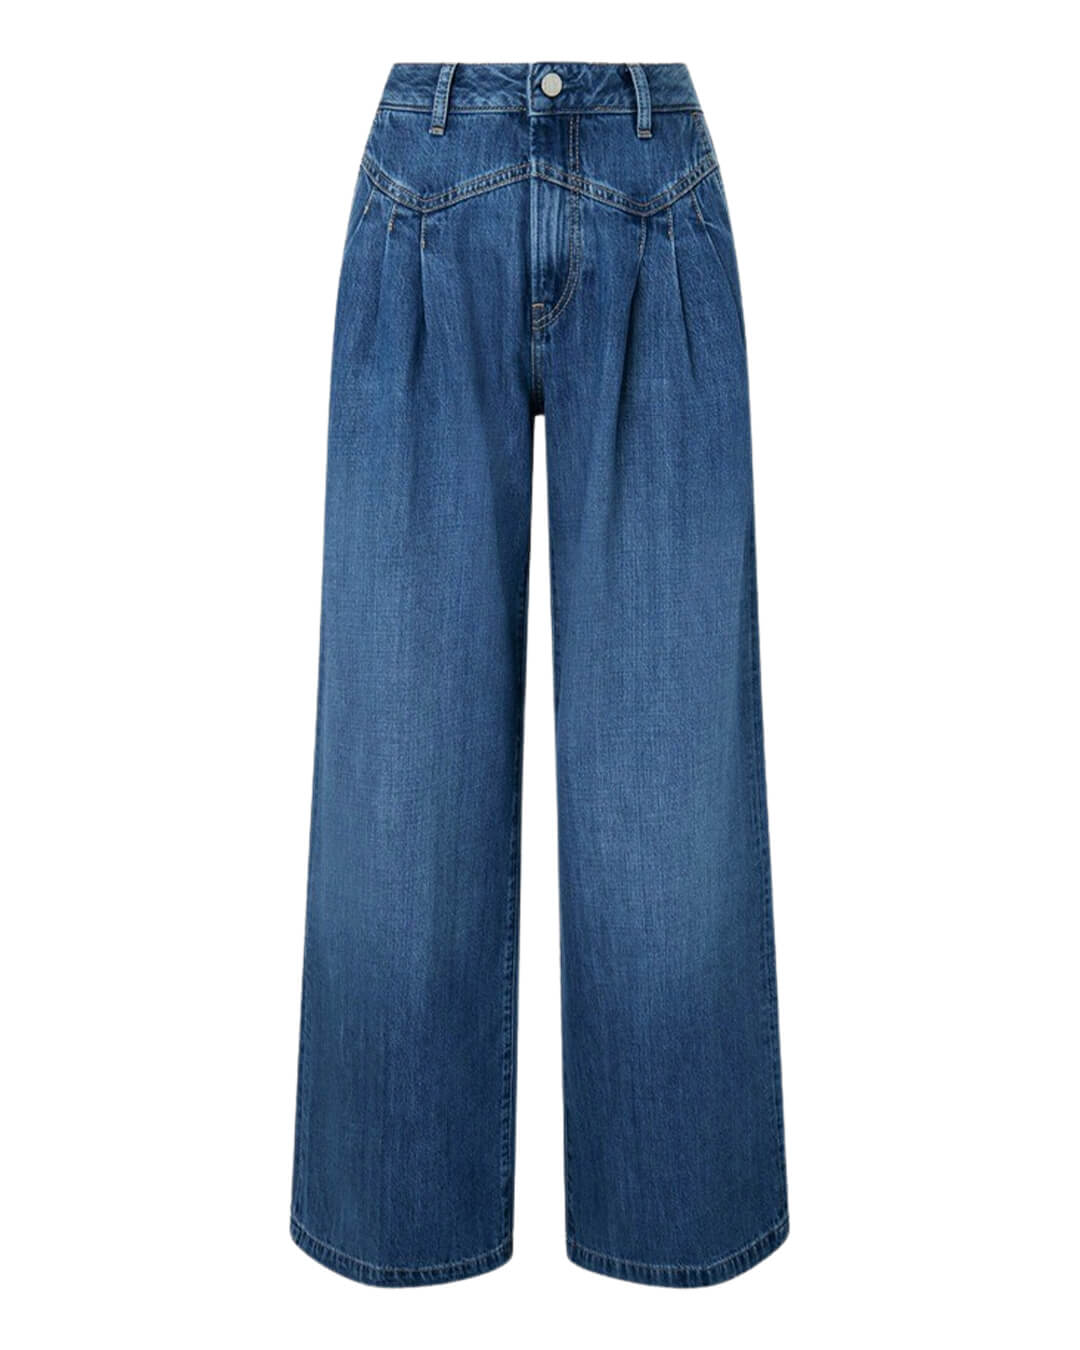 Pepe Jeans Jeans Pepe Jeans Quinn Pleated Denim Blue Jeans